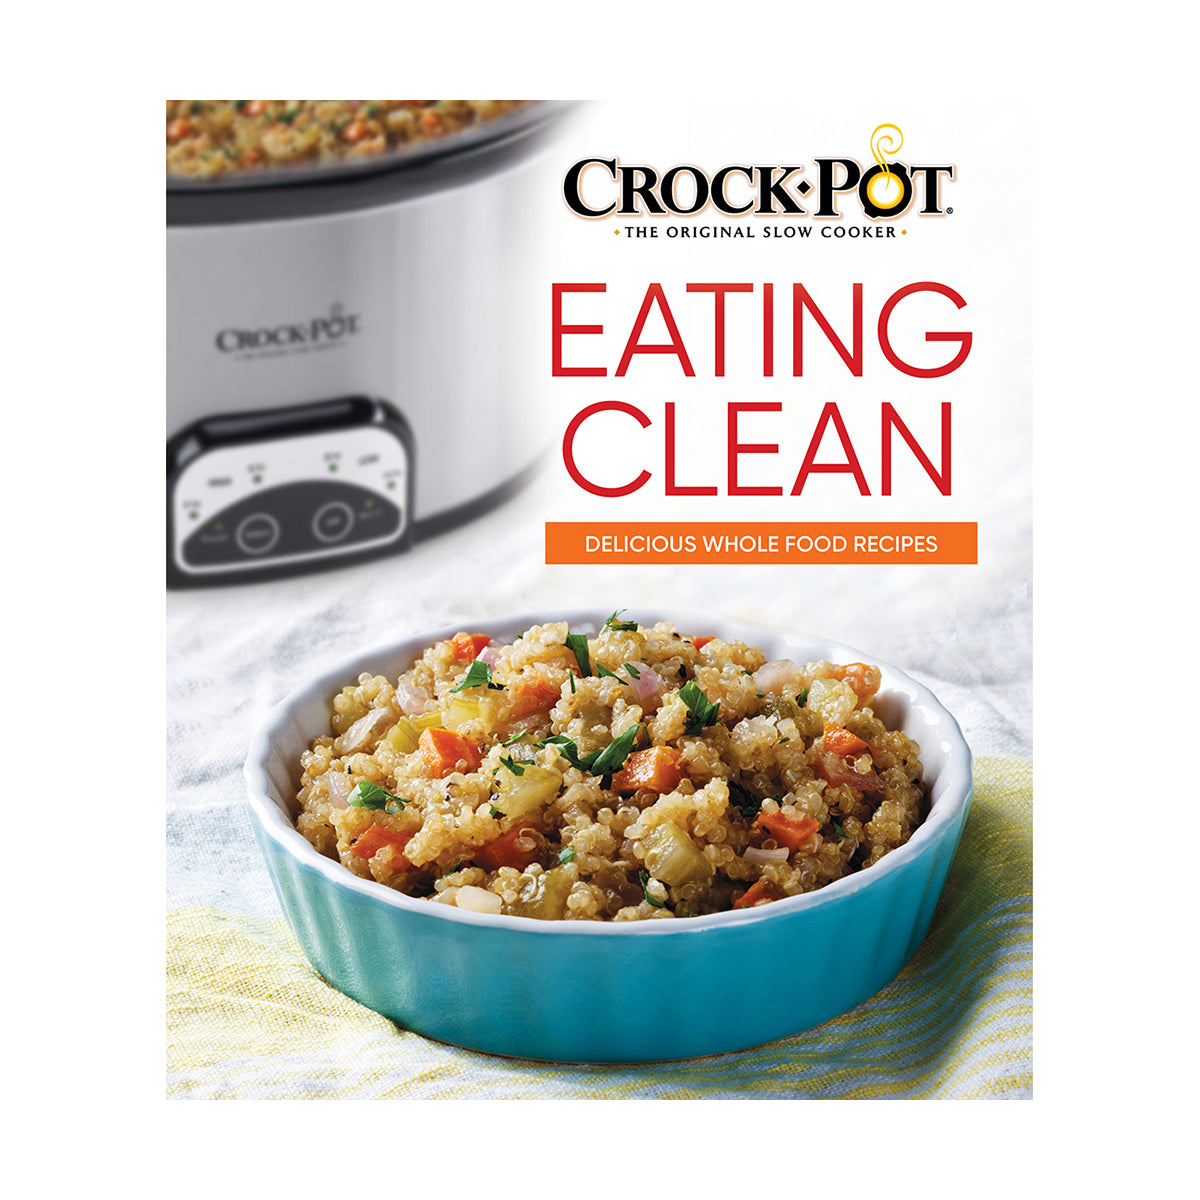 Crockpot Eating Clean Delicious Whole Food Recipes